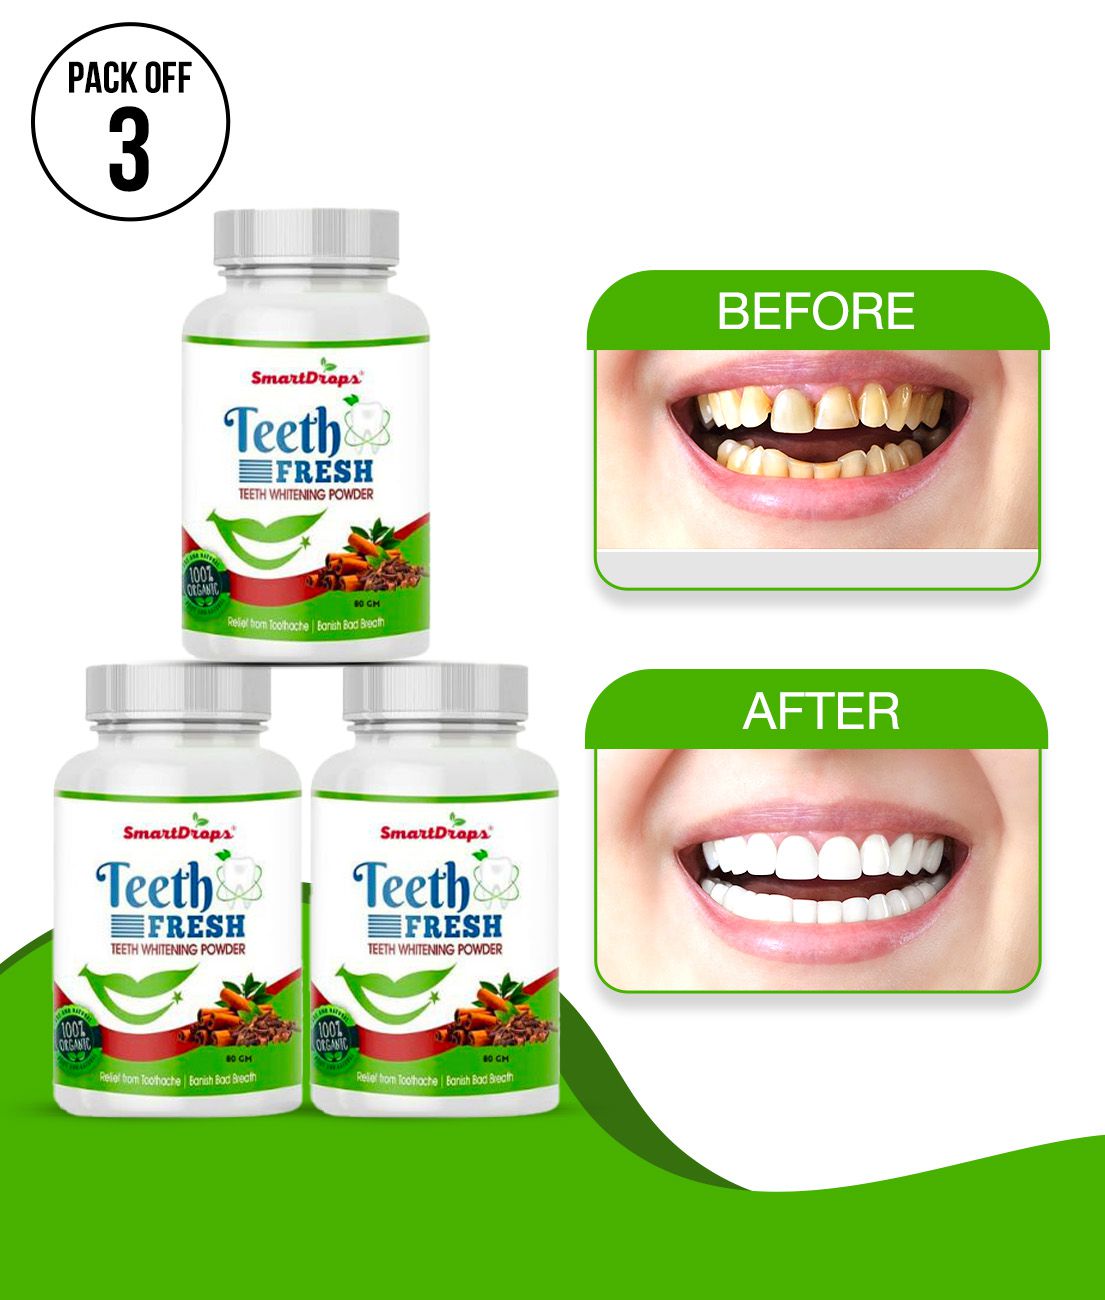     			Smartdrops Activated Charcoal Teeth Powder For Teeth Whitening Powder 80gm Pack of 3